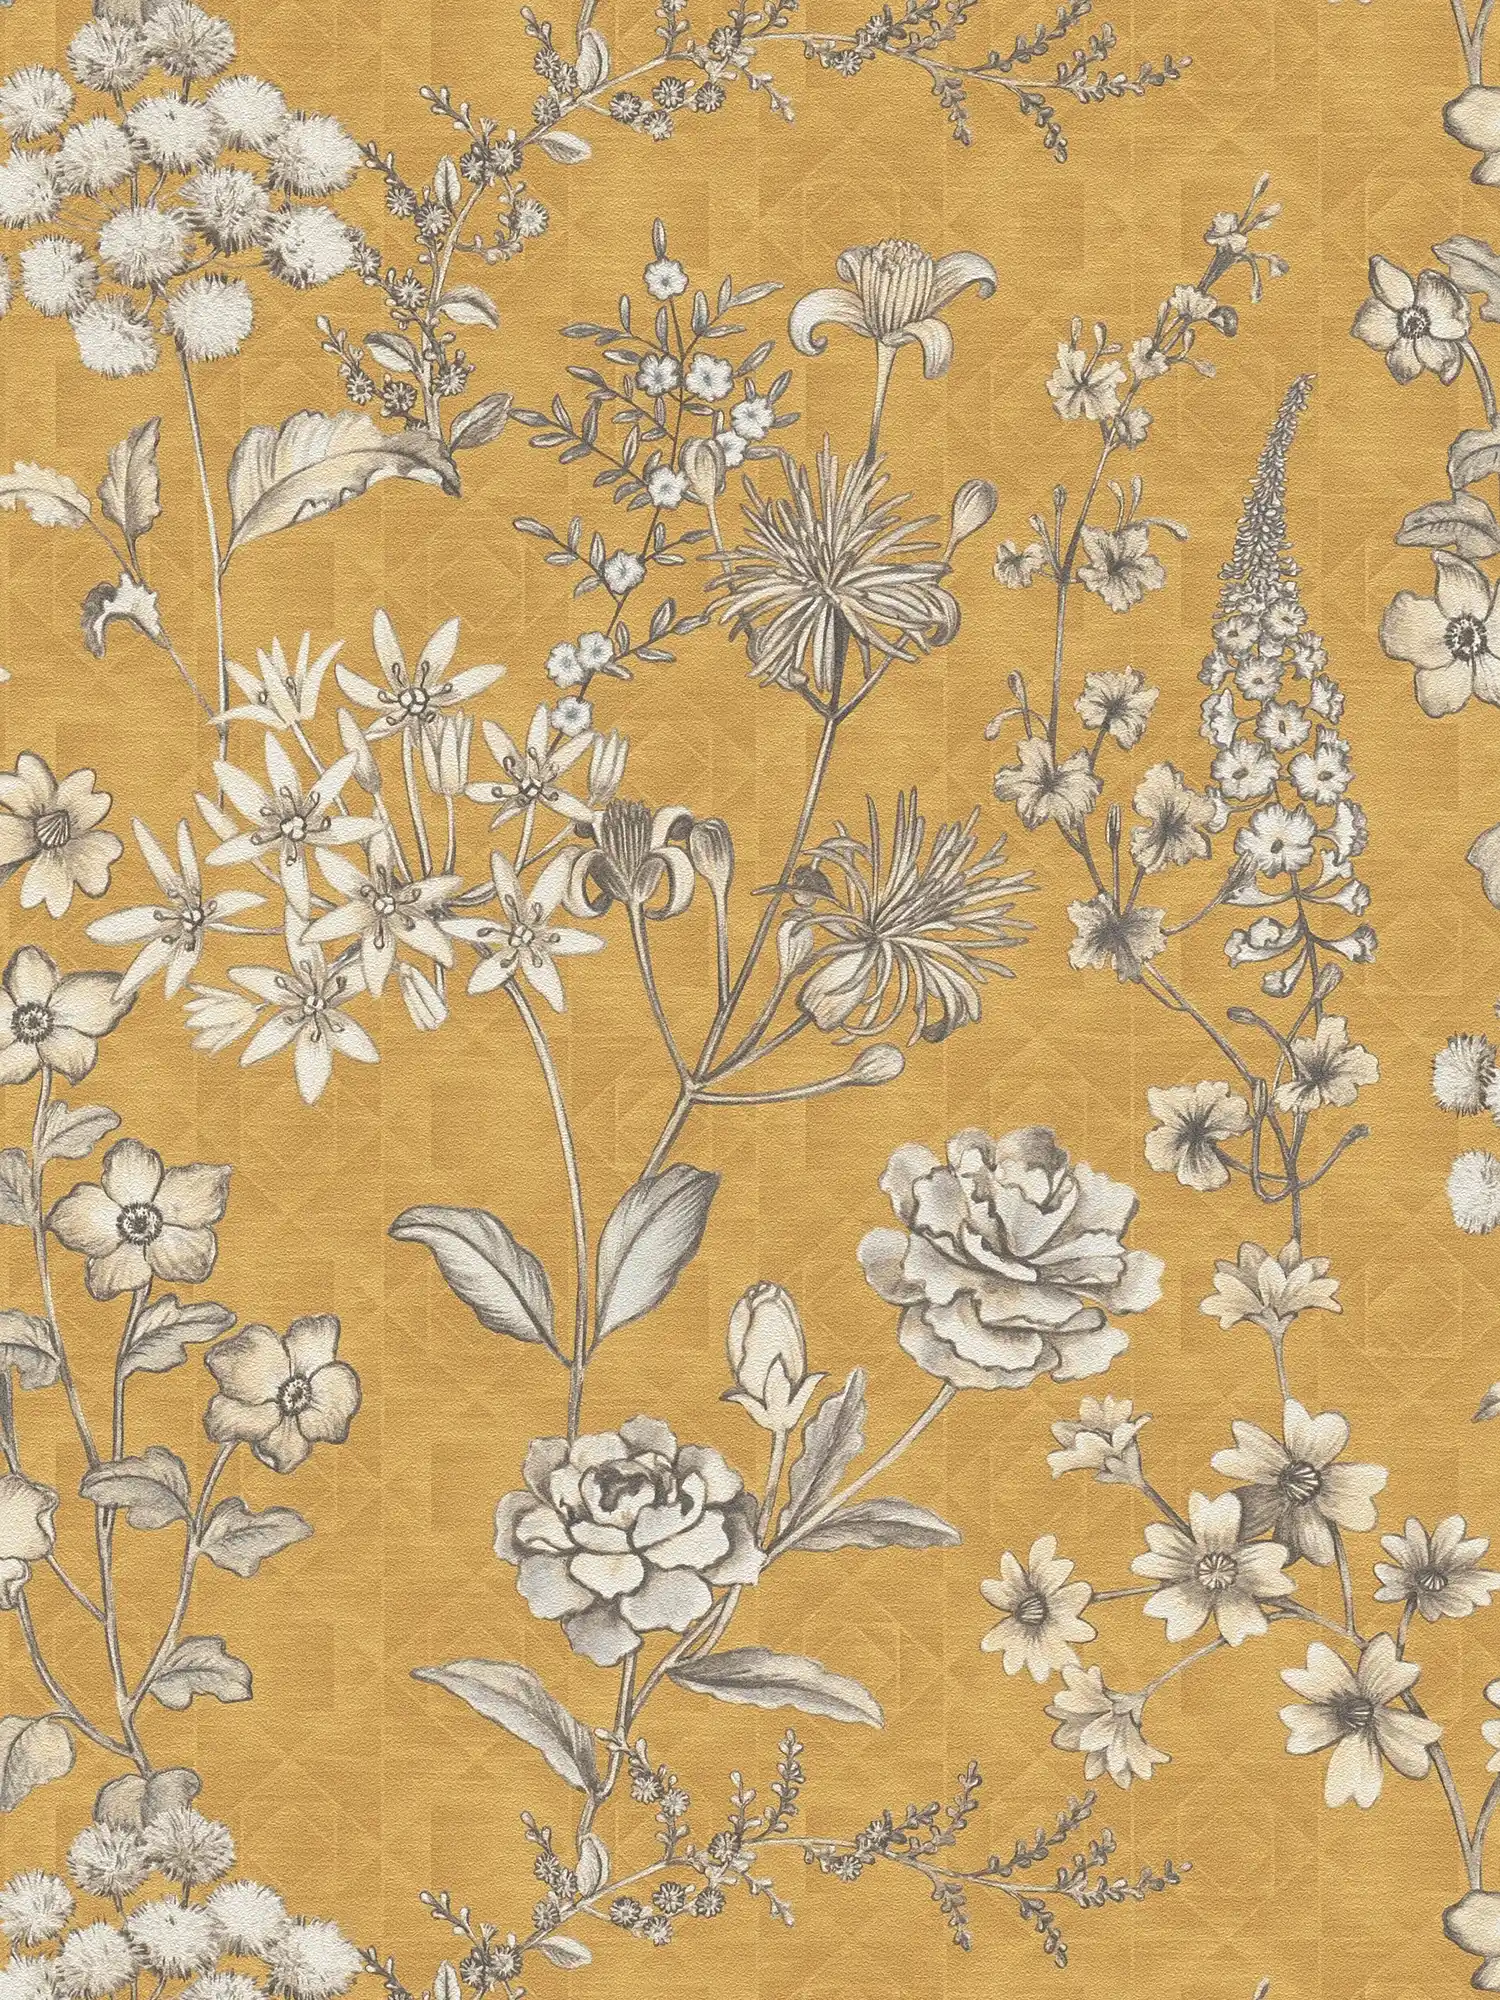 Vintage non-woven wallpaper with floral pattern - yellow, white, grey
